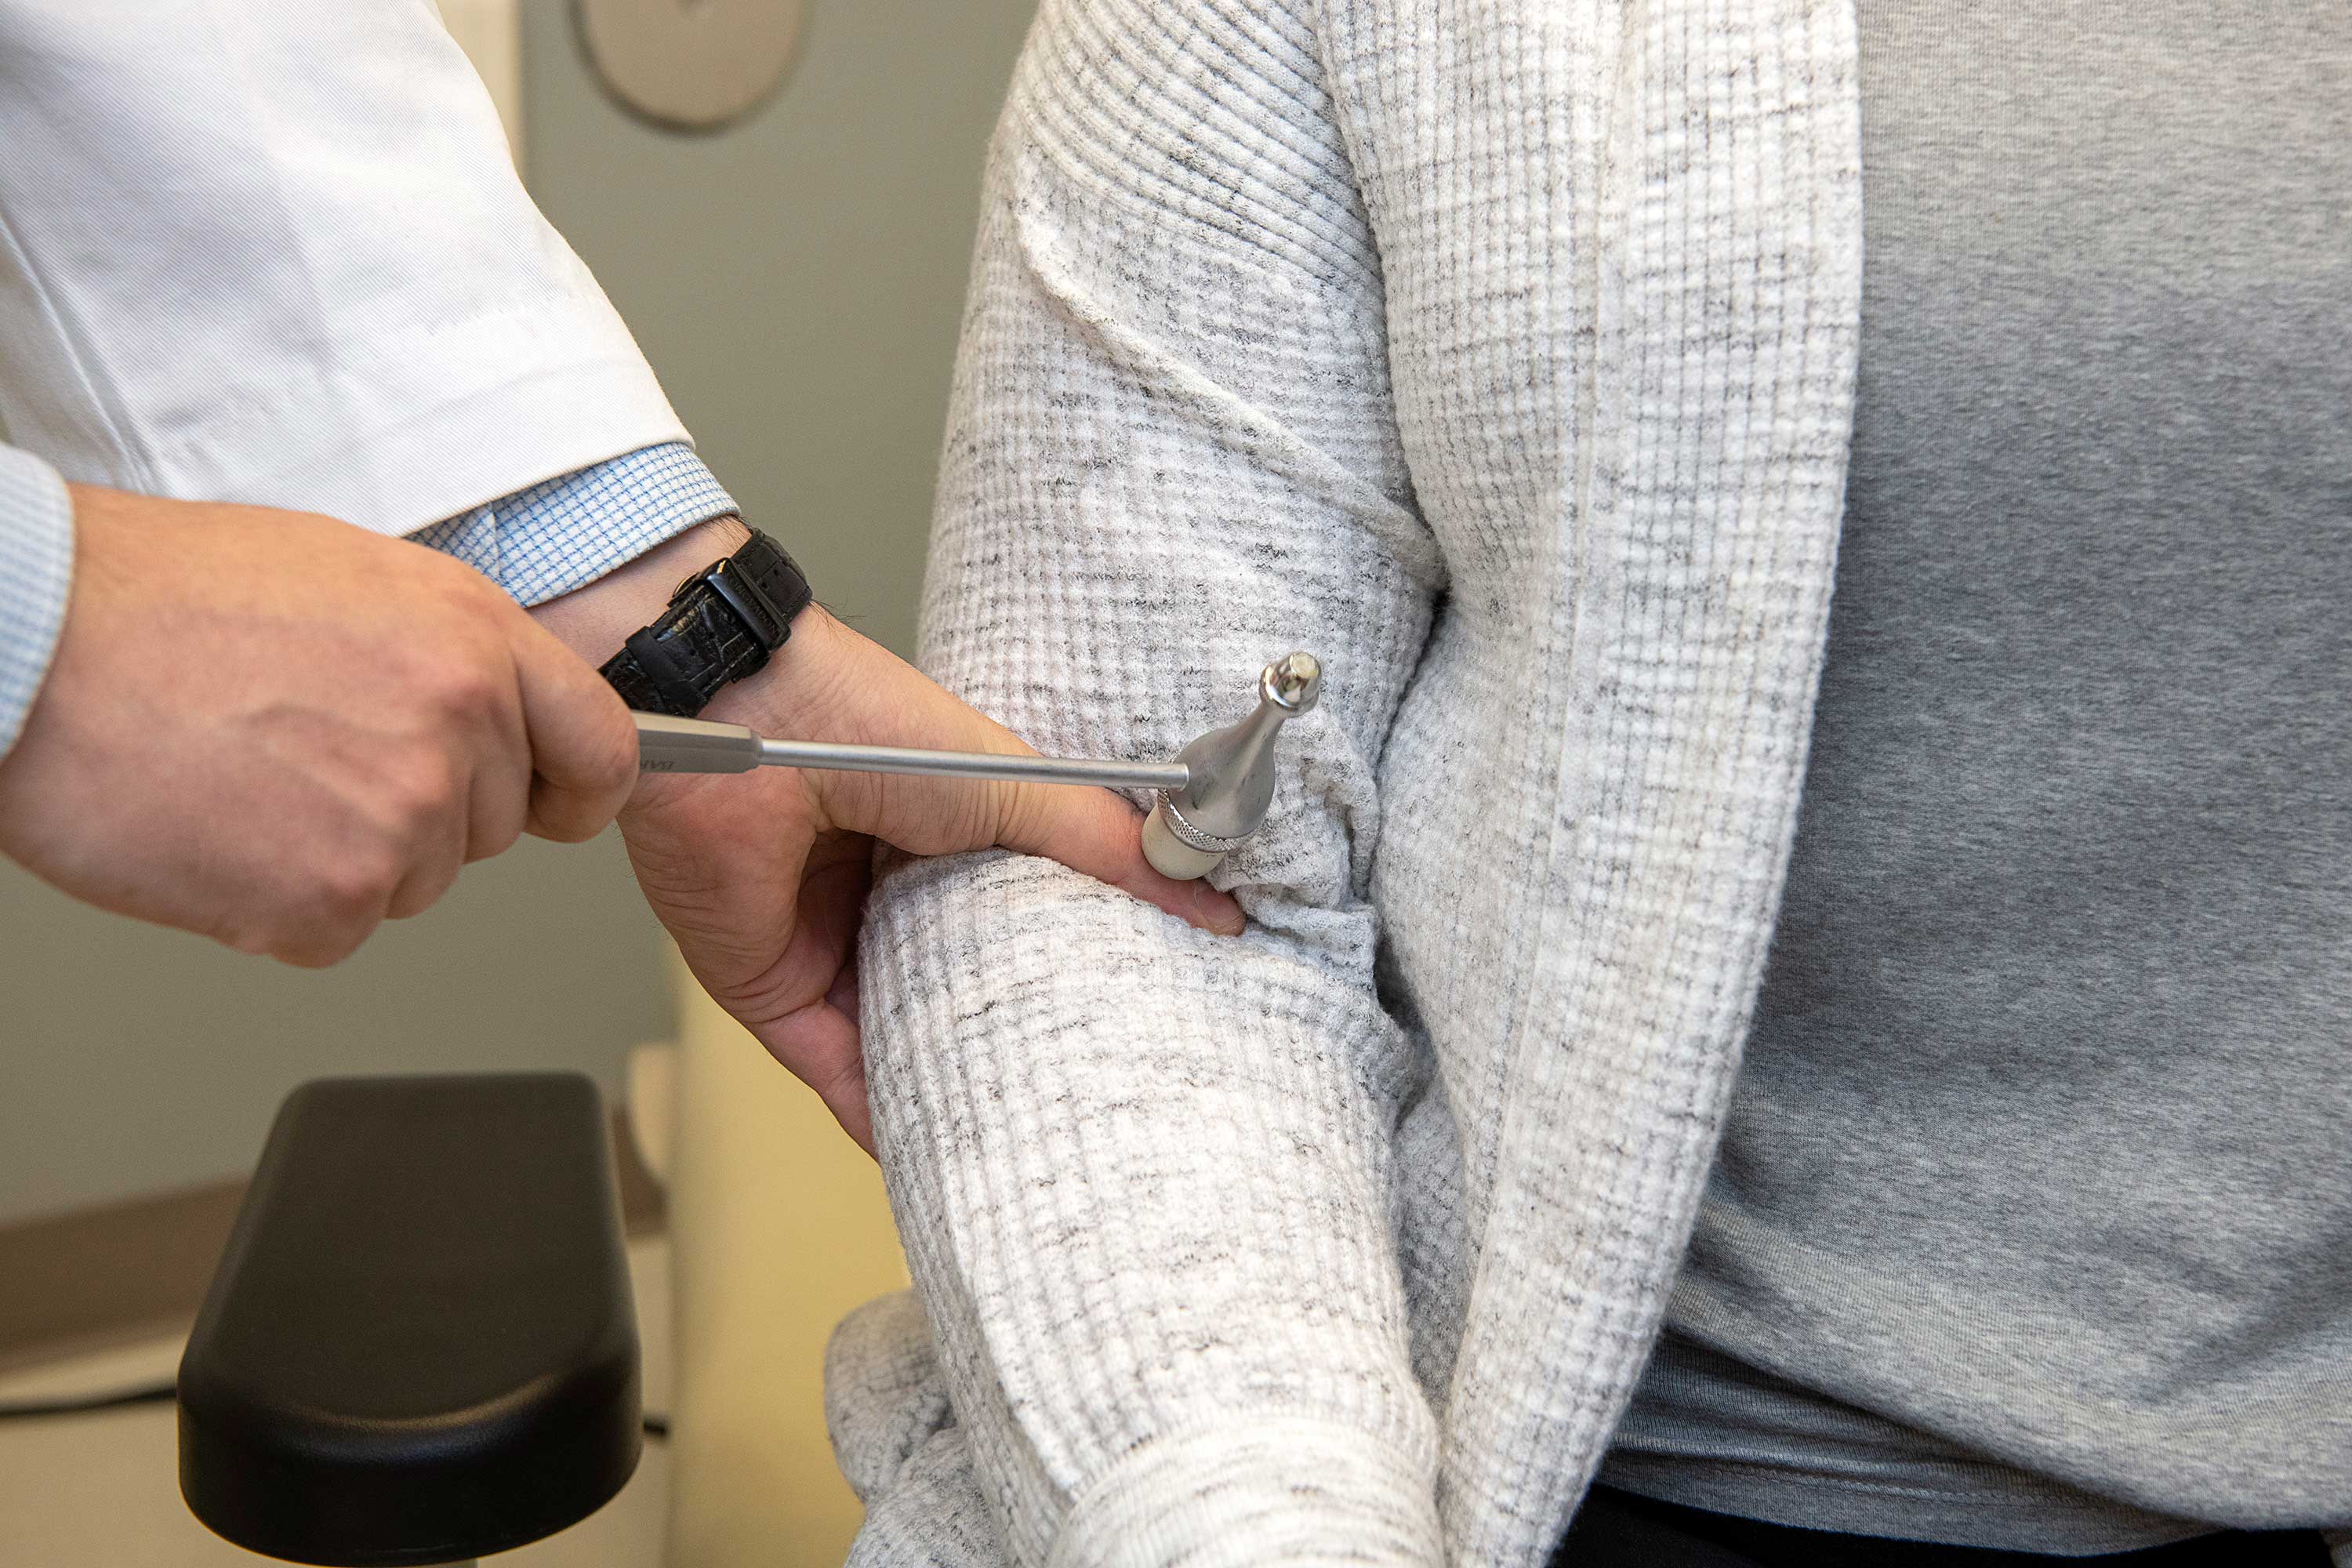 An expert in Parkinson's disease tests the muscle and reflexes of a patient.